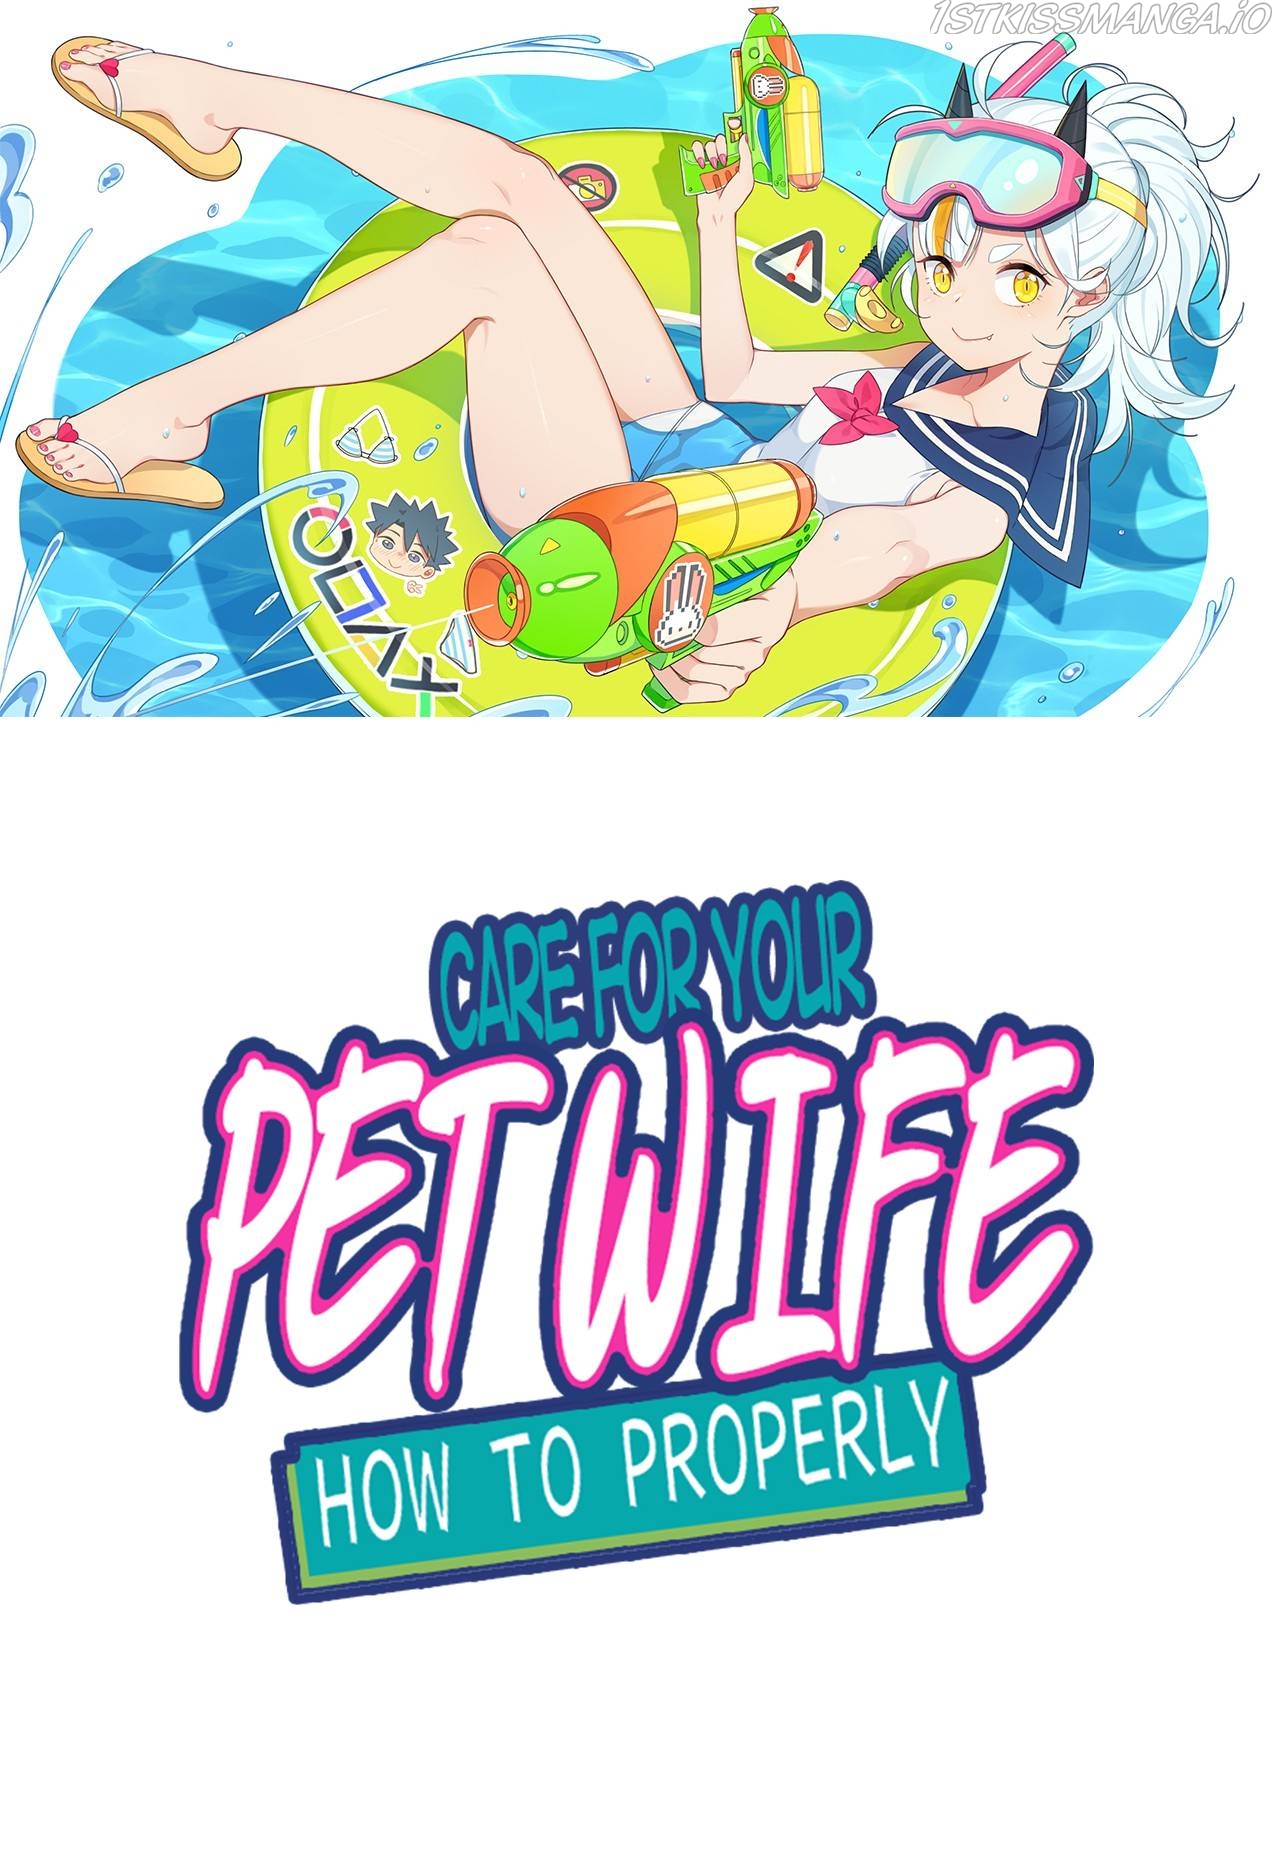 How To Properly Care For Your Pet Wife Chapter 77 - Page 0